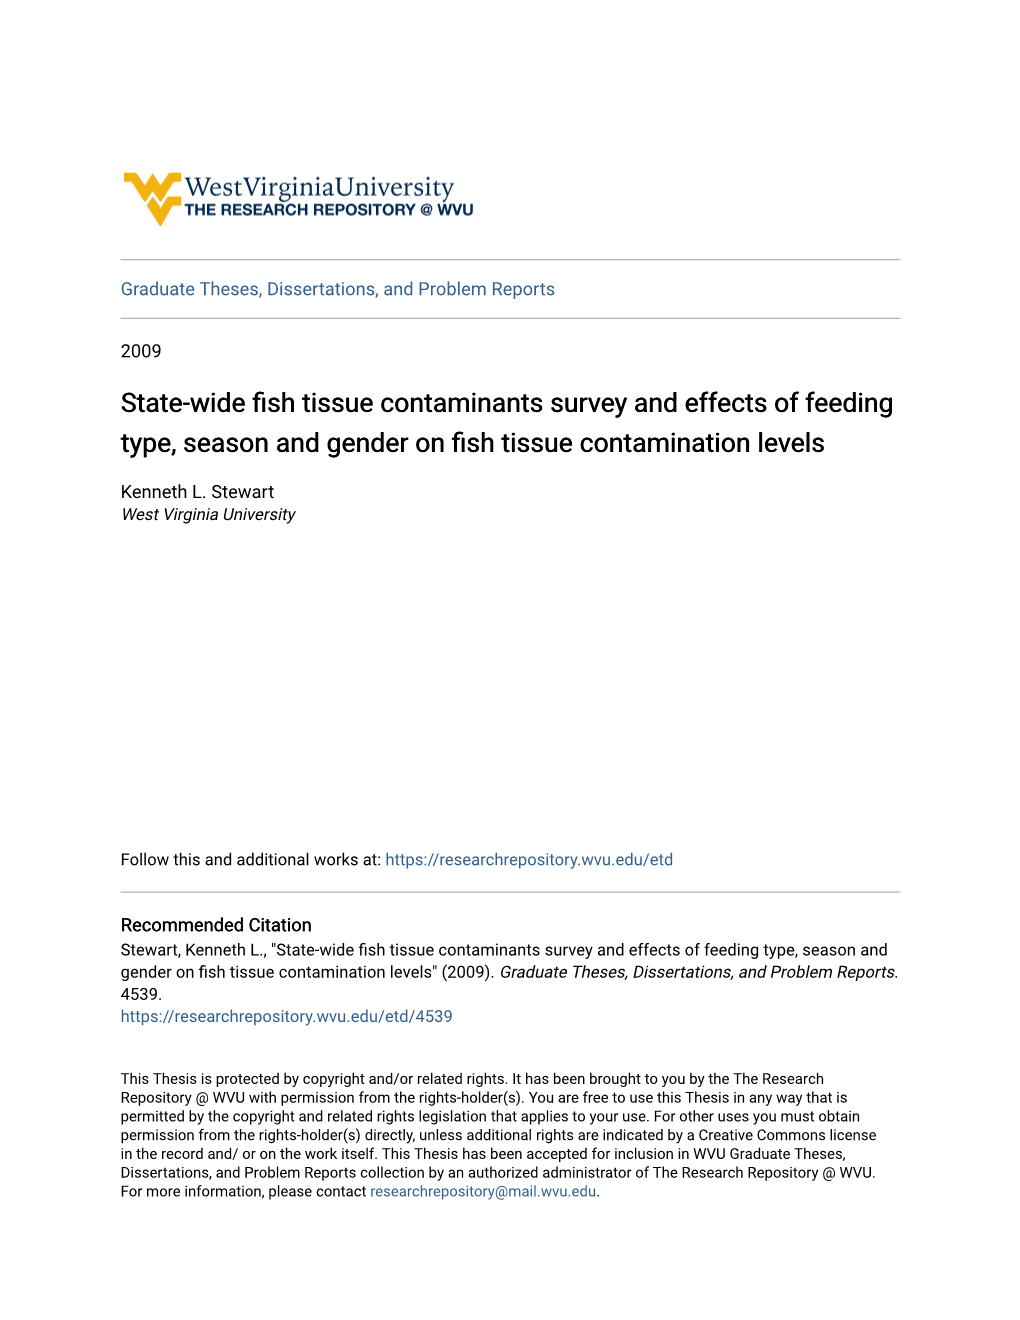 State-Wide Fish Tissue Contaminants Survey and Effects of Feeding Type, Season and Gender on Fish Tissue Contamination Levels